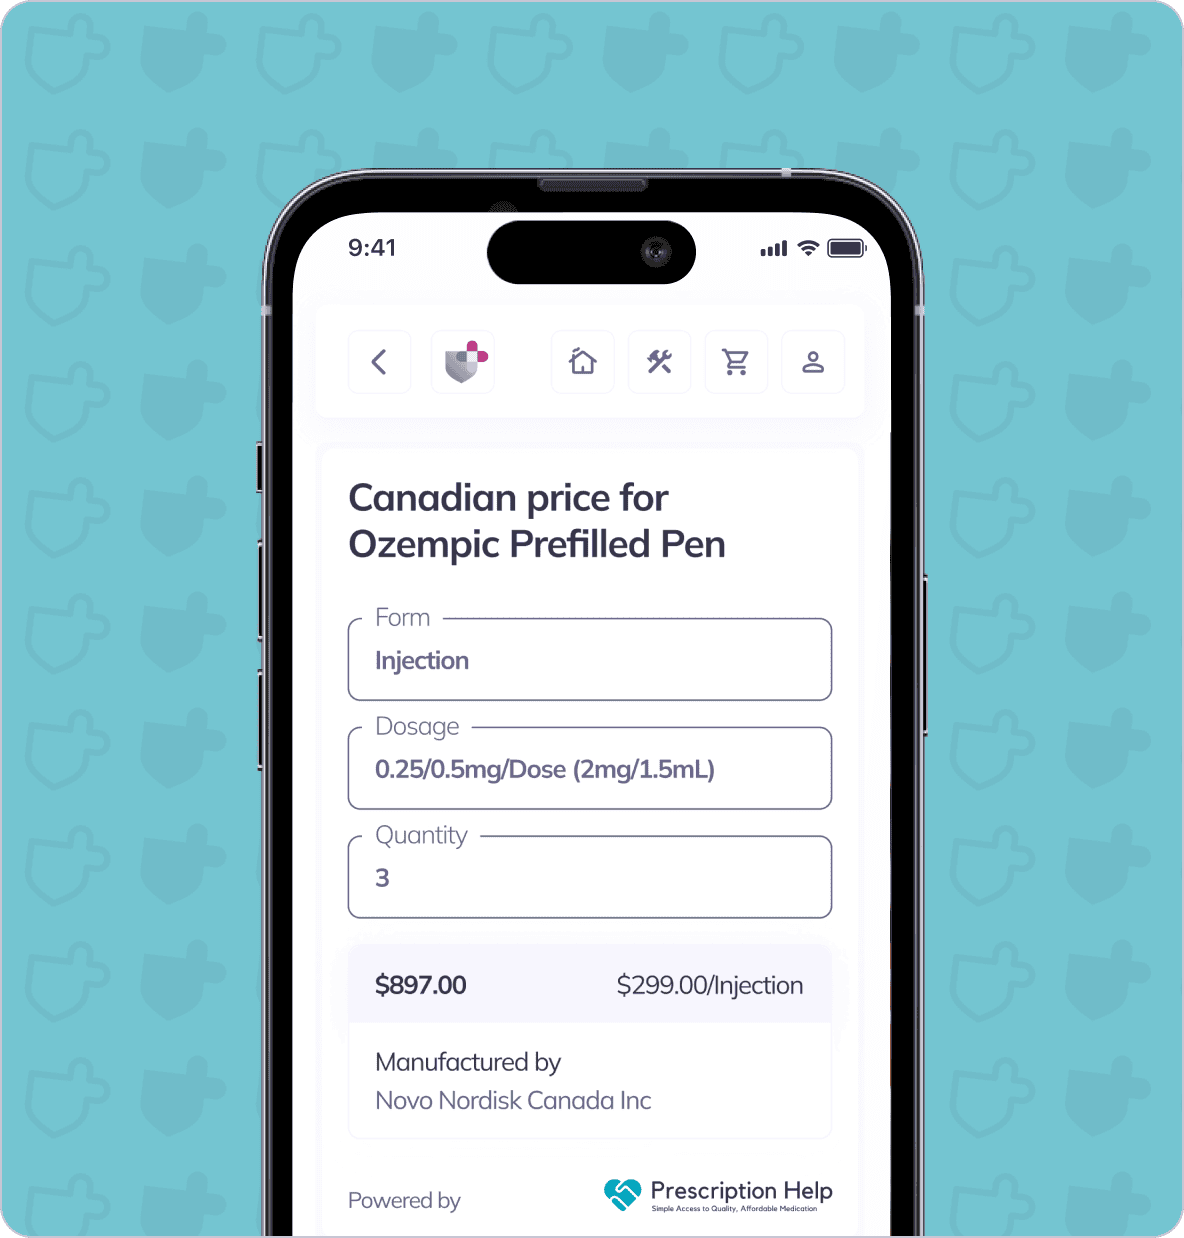 A smartphone screen displays information about the Canadian price for Ozempic Prefilled Pen, showing an injection form with a dosage of 0.25/0.5mg, a quantity of 3, and a total price of $897.